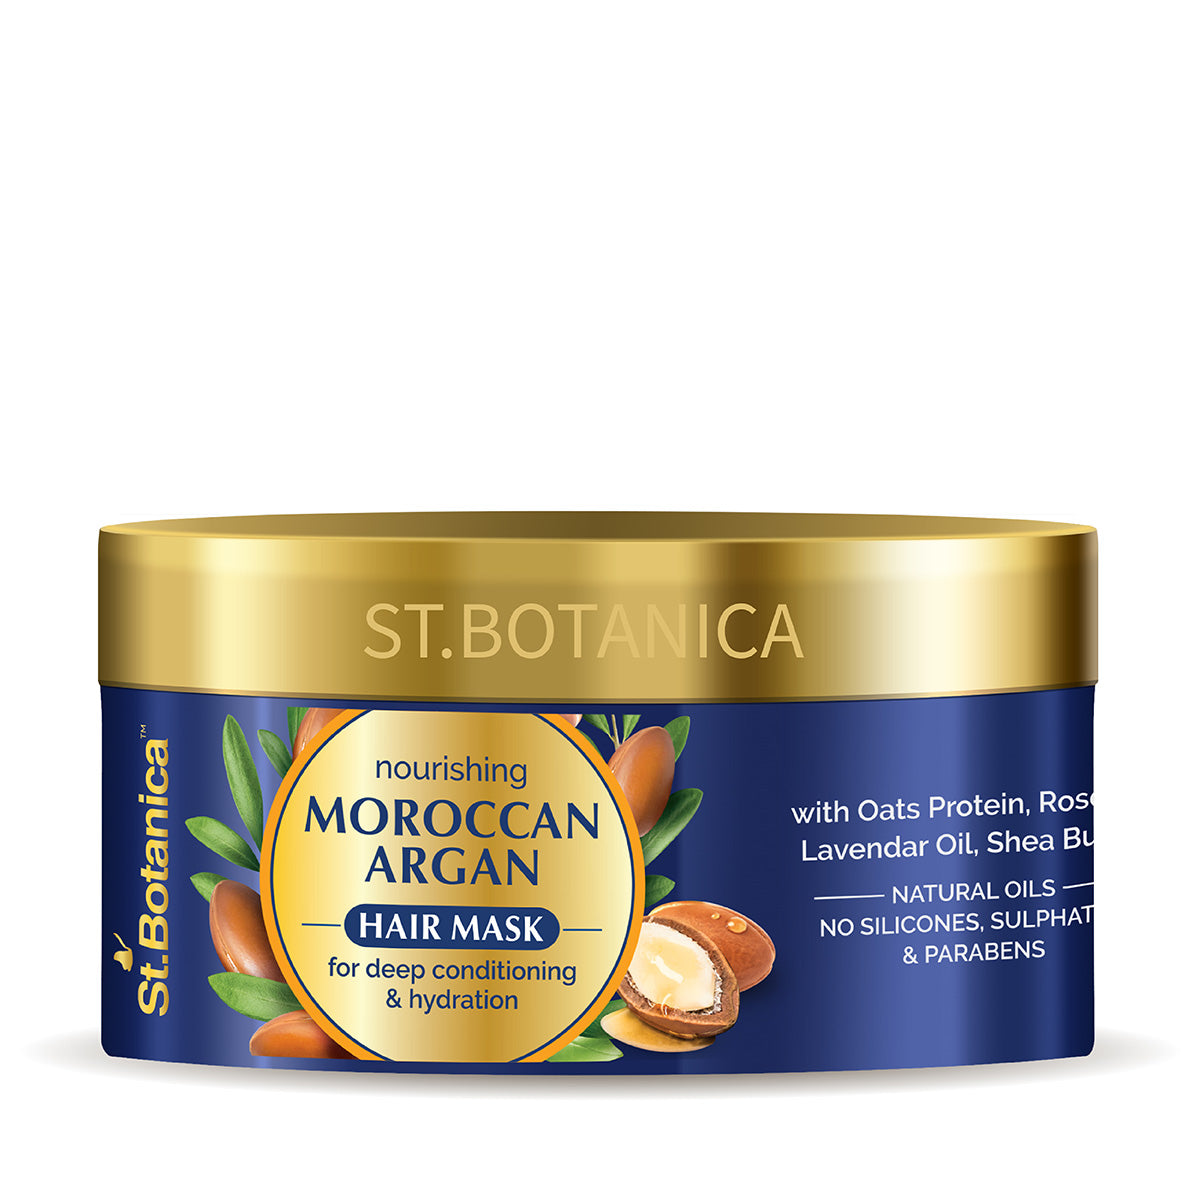 St.Botanica Moroccan Argan Hair Mask - Deep Conditioning & Hydration For Healthier Looking Hair, 200 ml